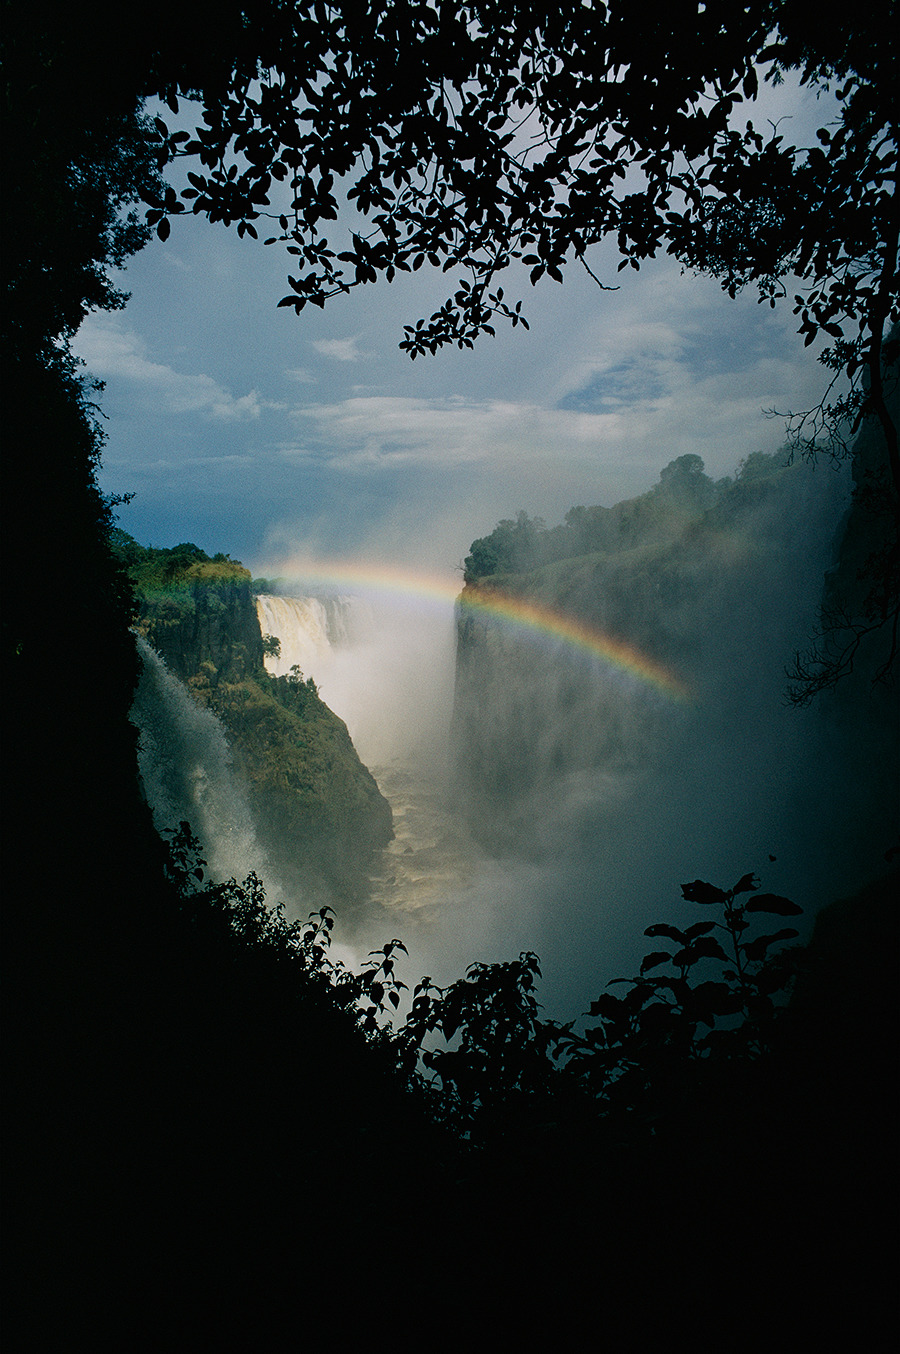 Rainbow Photos, Pictures -- National Geographic